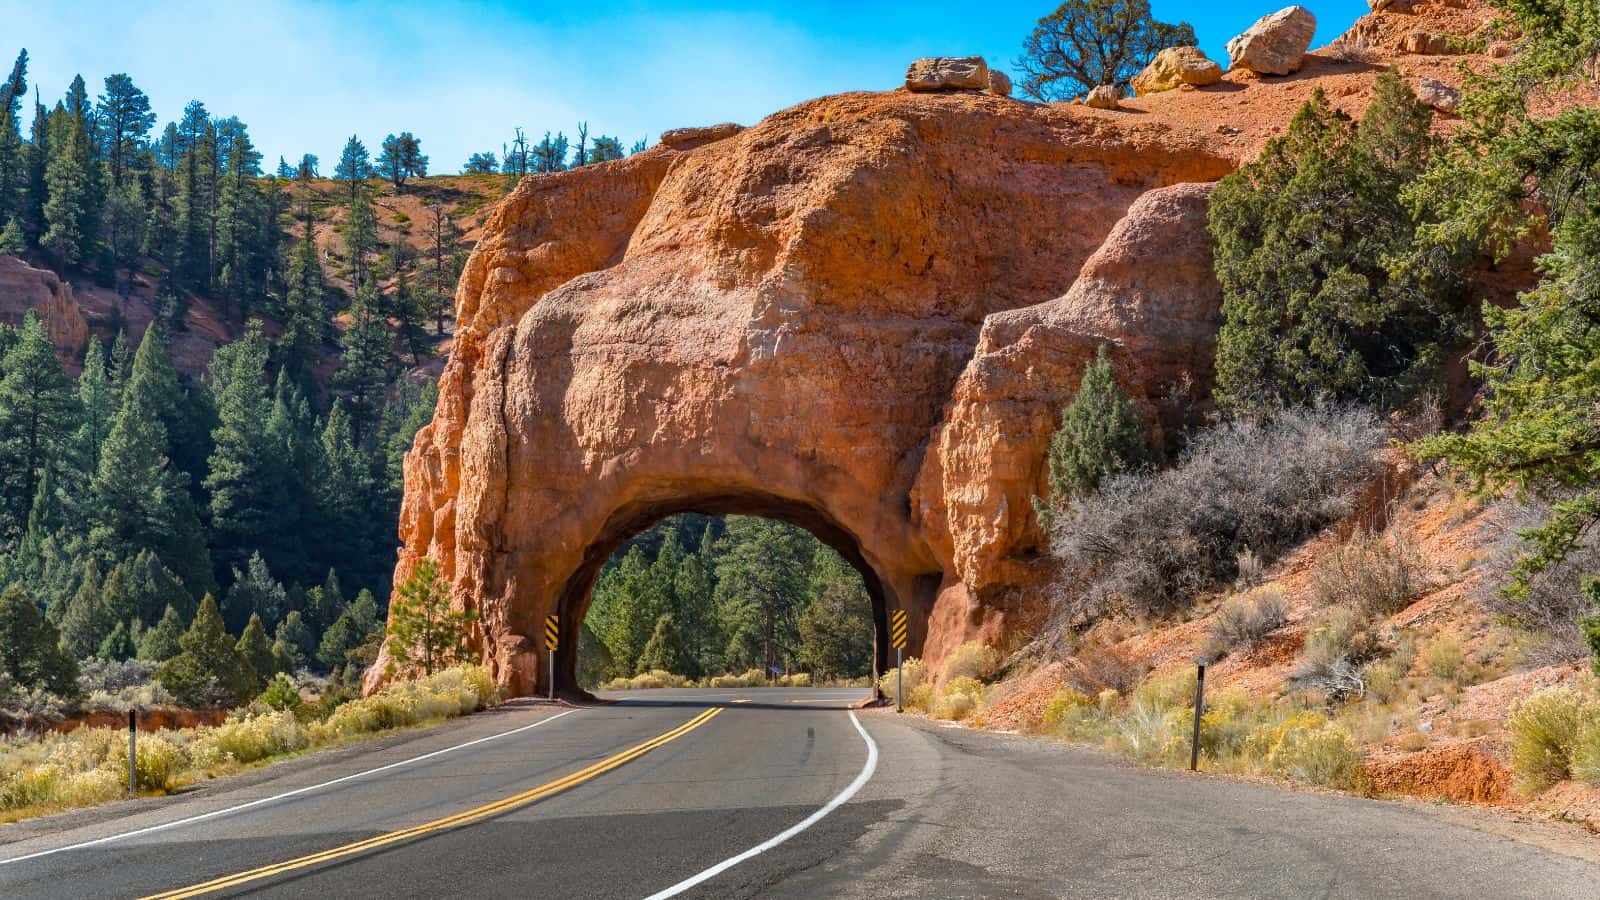 <p>Discover Utah’s diverse landscapes on Scenic Byway 12, which passes through Bryce Canyon, Grand Staircase-Escalante, and Capitol Reef <a href="https://whatthefab.com/national-parks-utah.html" rel="follow">National Parks</a>.</p><p>This 124-mile route offers breathtaking views of red rock canyons, towering rock formations, and stunning desert landscapes.</p><p>Spot wildlife such as bighorn sheep and mule deer and enjoy outdoor activities such as horseback riding, mountain biking, and rock climbing.</p><p>Along this route, stop at gorgeous overlooks like Bryce Point, Escalante Petrified Forest State Park, and the Anasazi State Park Museum.</p>